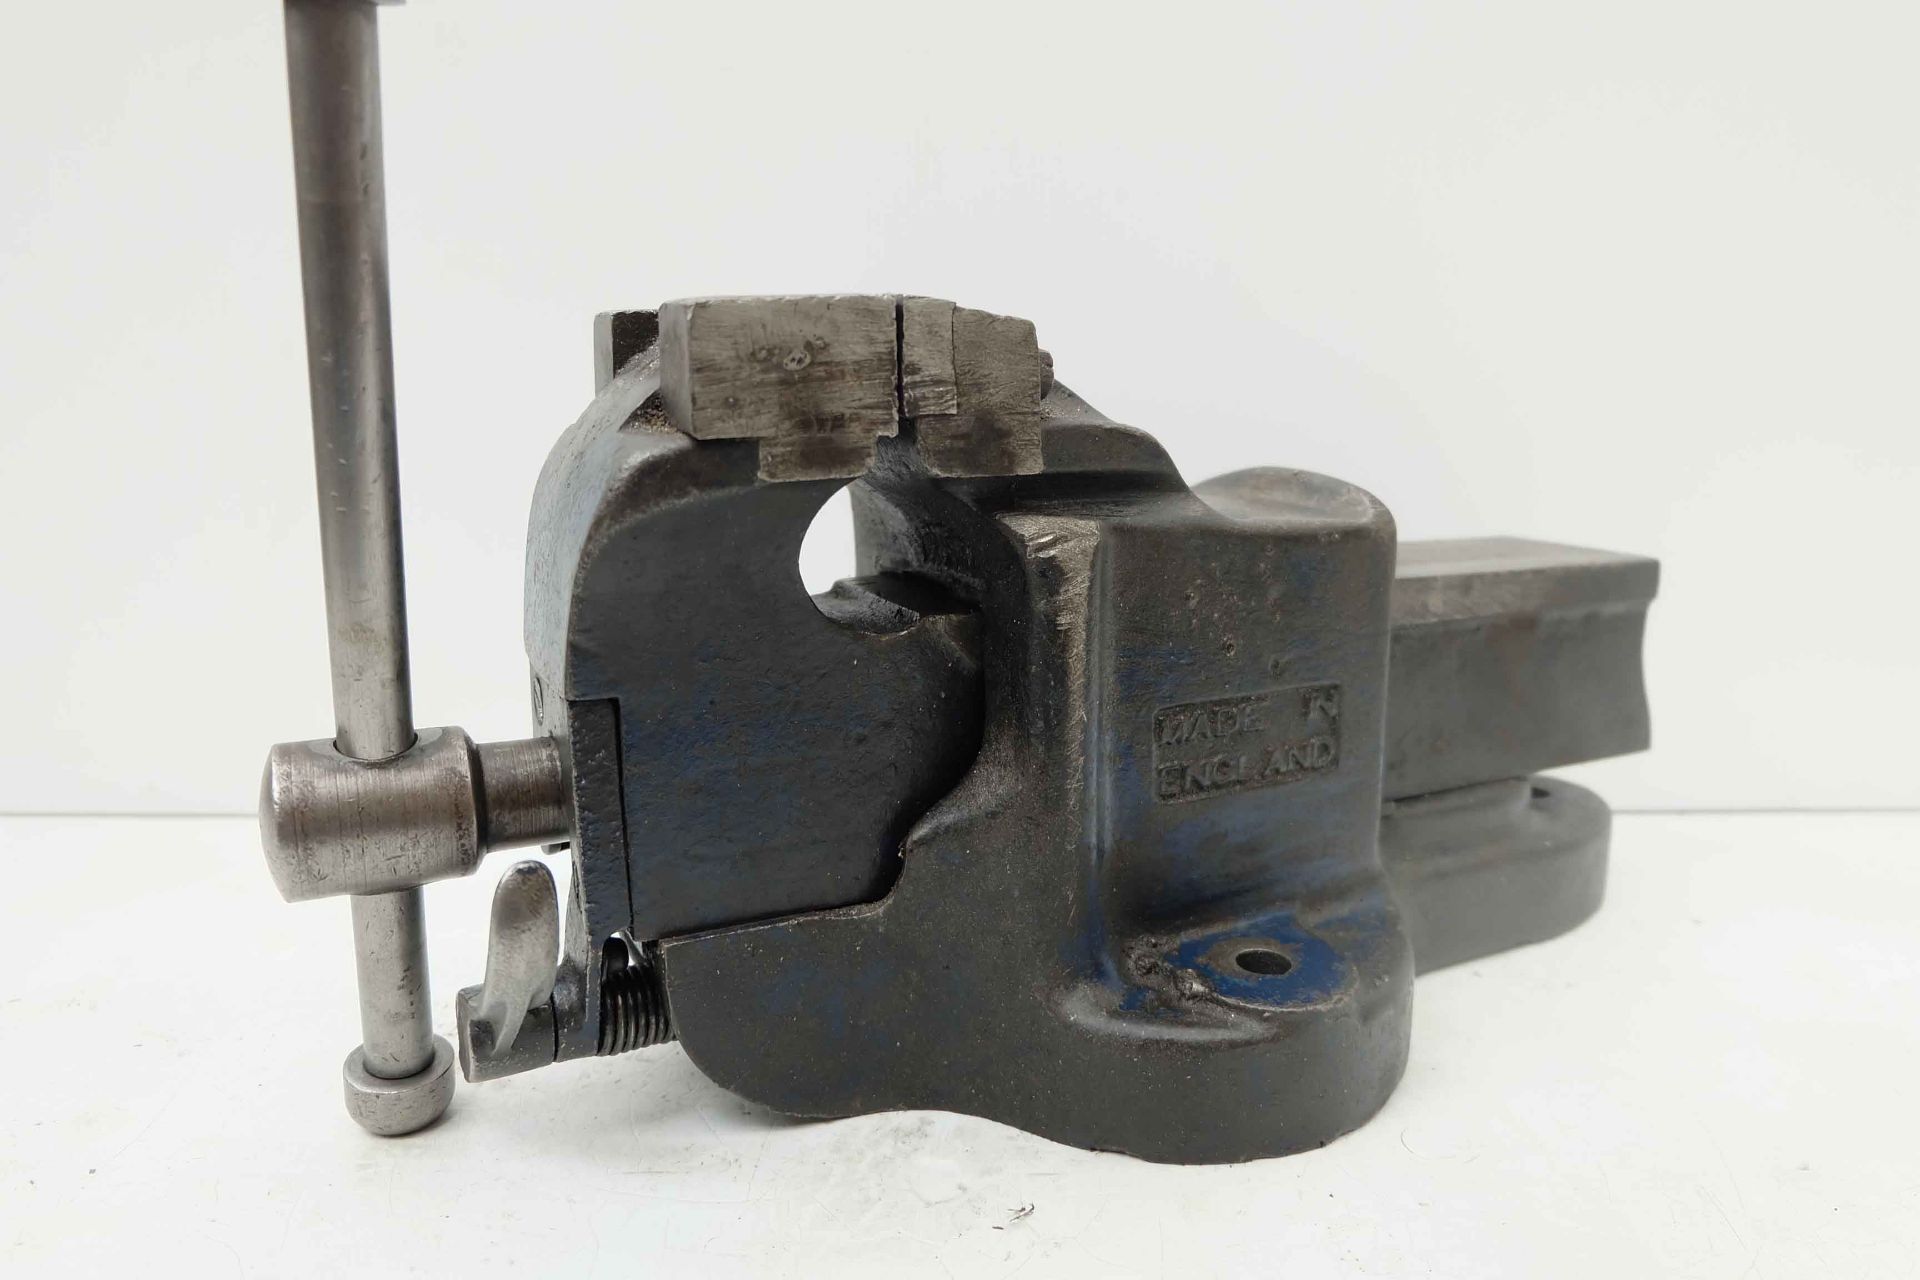 Woden Engineers Bench Vice With Quick Release. Width of Jaws 3 3/4". - Image 3 of 5